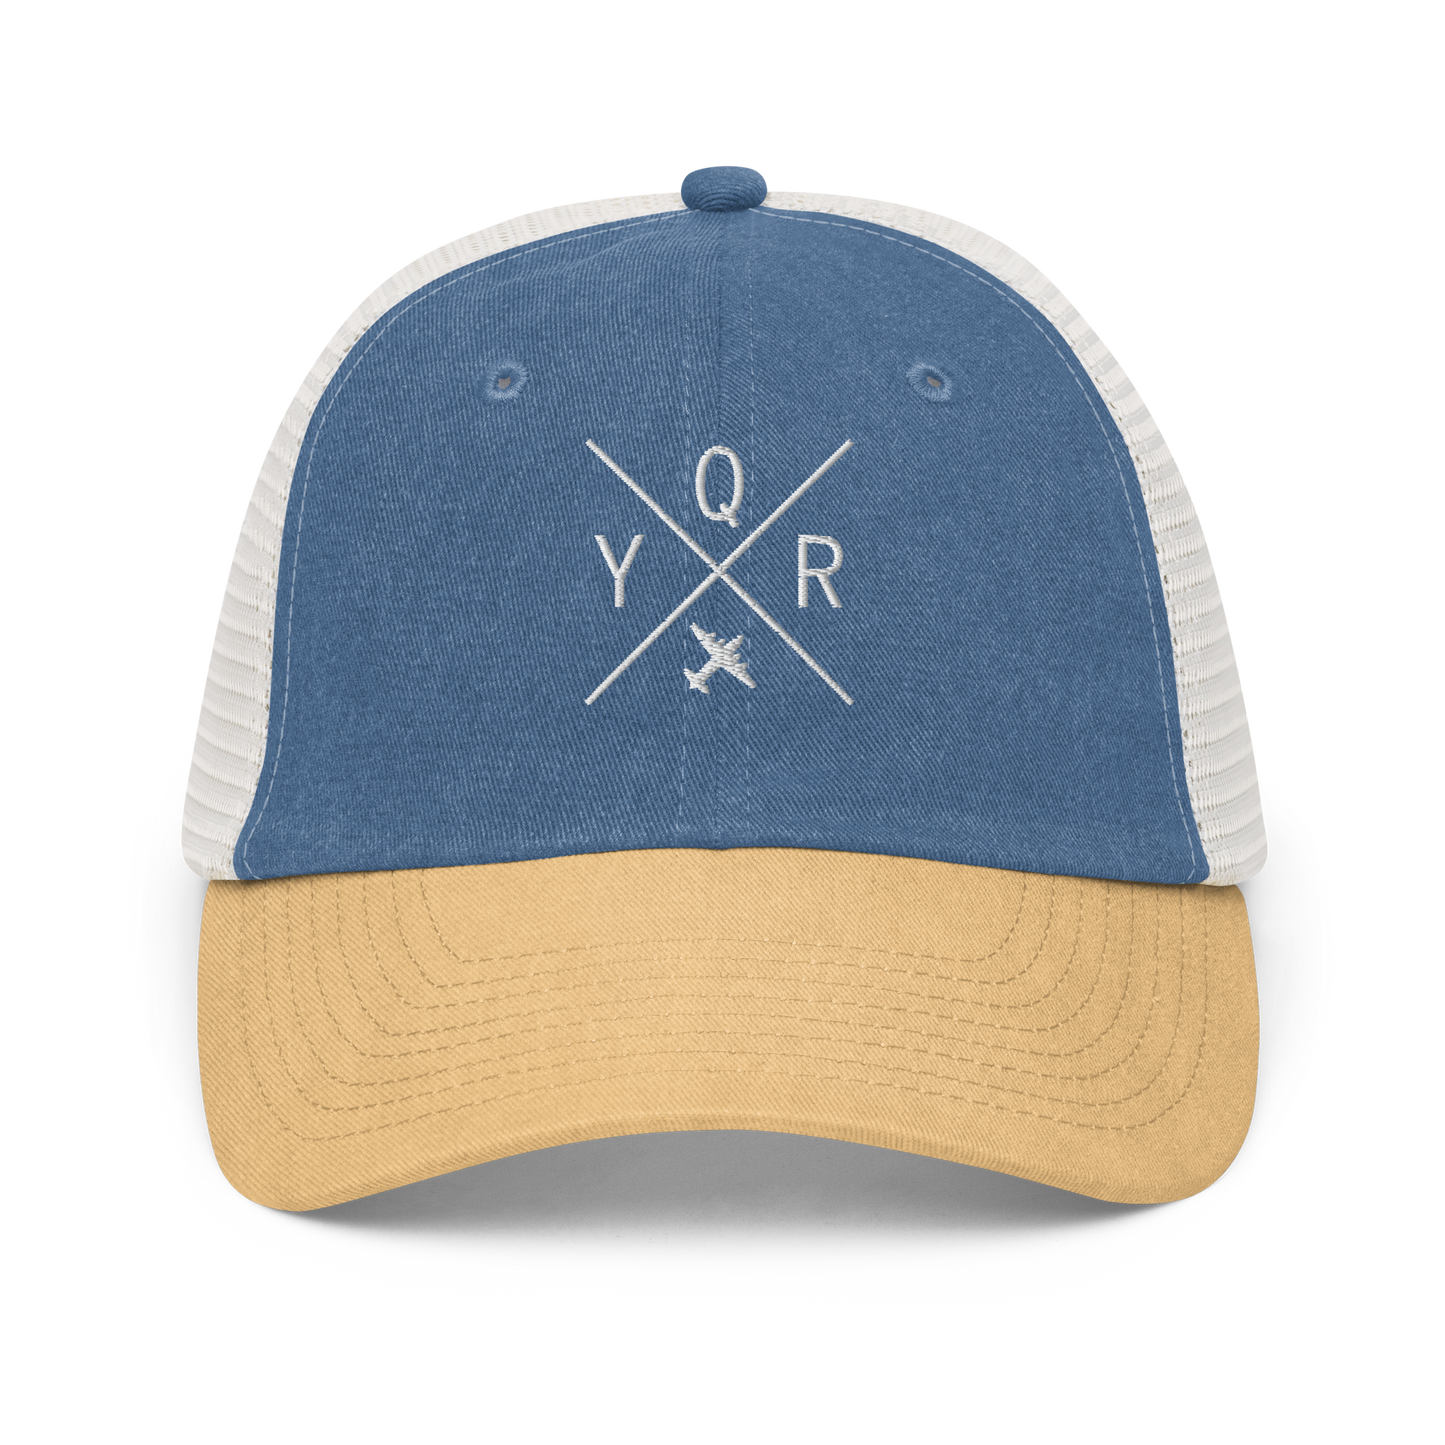 YHM Designs - YQR Regina Pigment-Dyed Trucker Cap - Crossed-X Design with Airport Code and Vintage Propliner - White Embroidery - Image 01